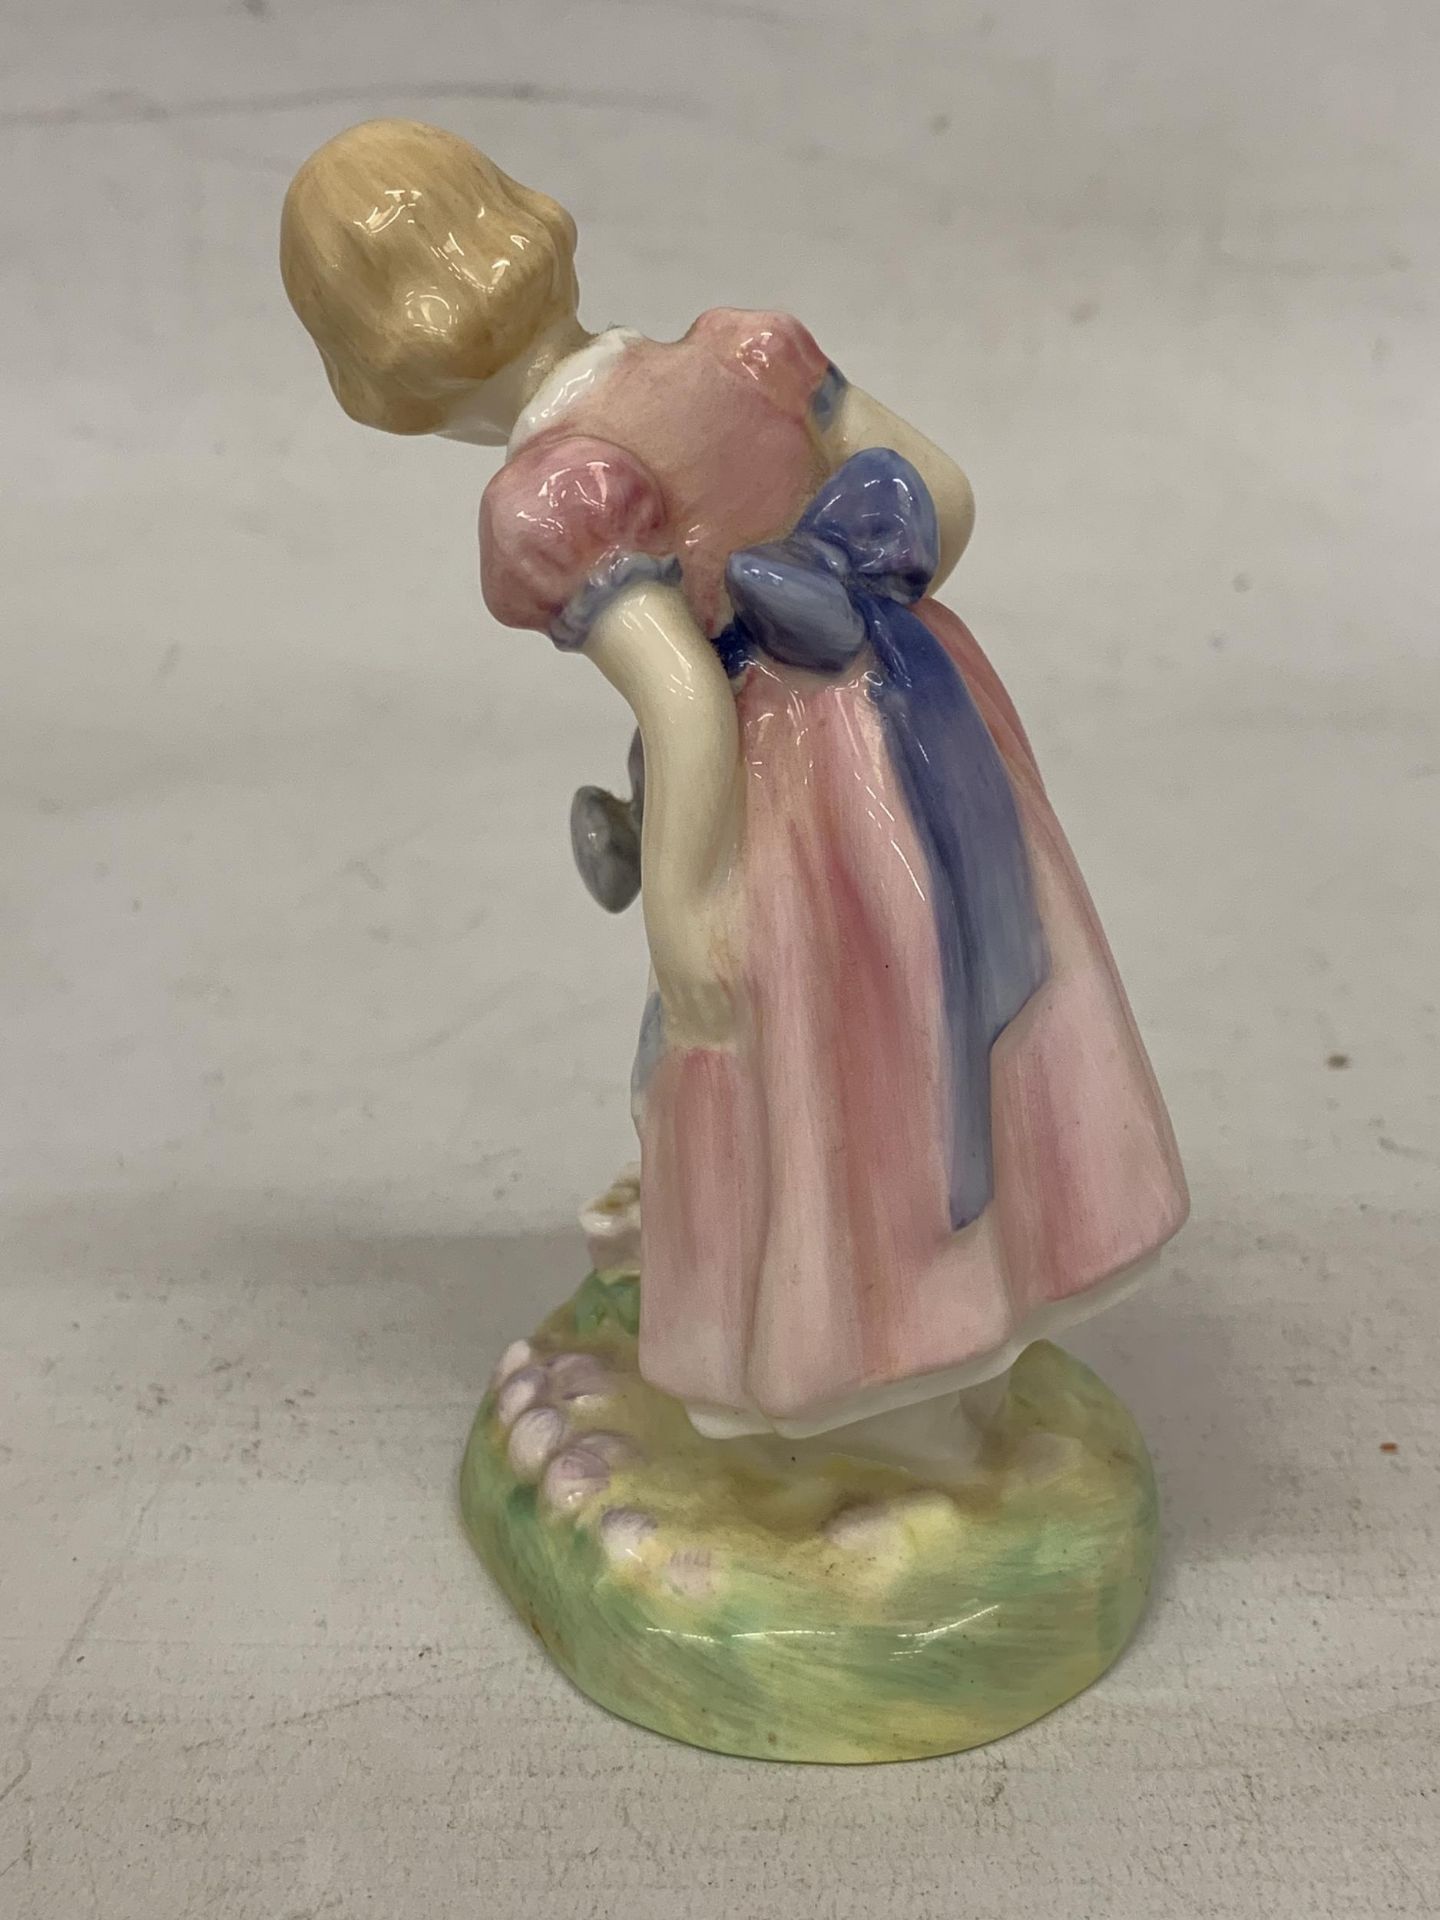 A ROYAL DOULTON FIGURE "MARY MARY" HN 2044 - Image 3 of 4